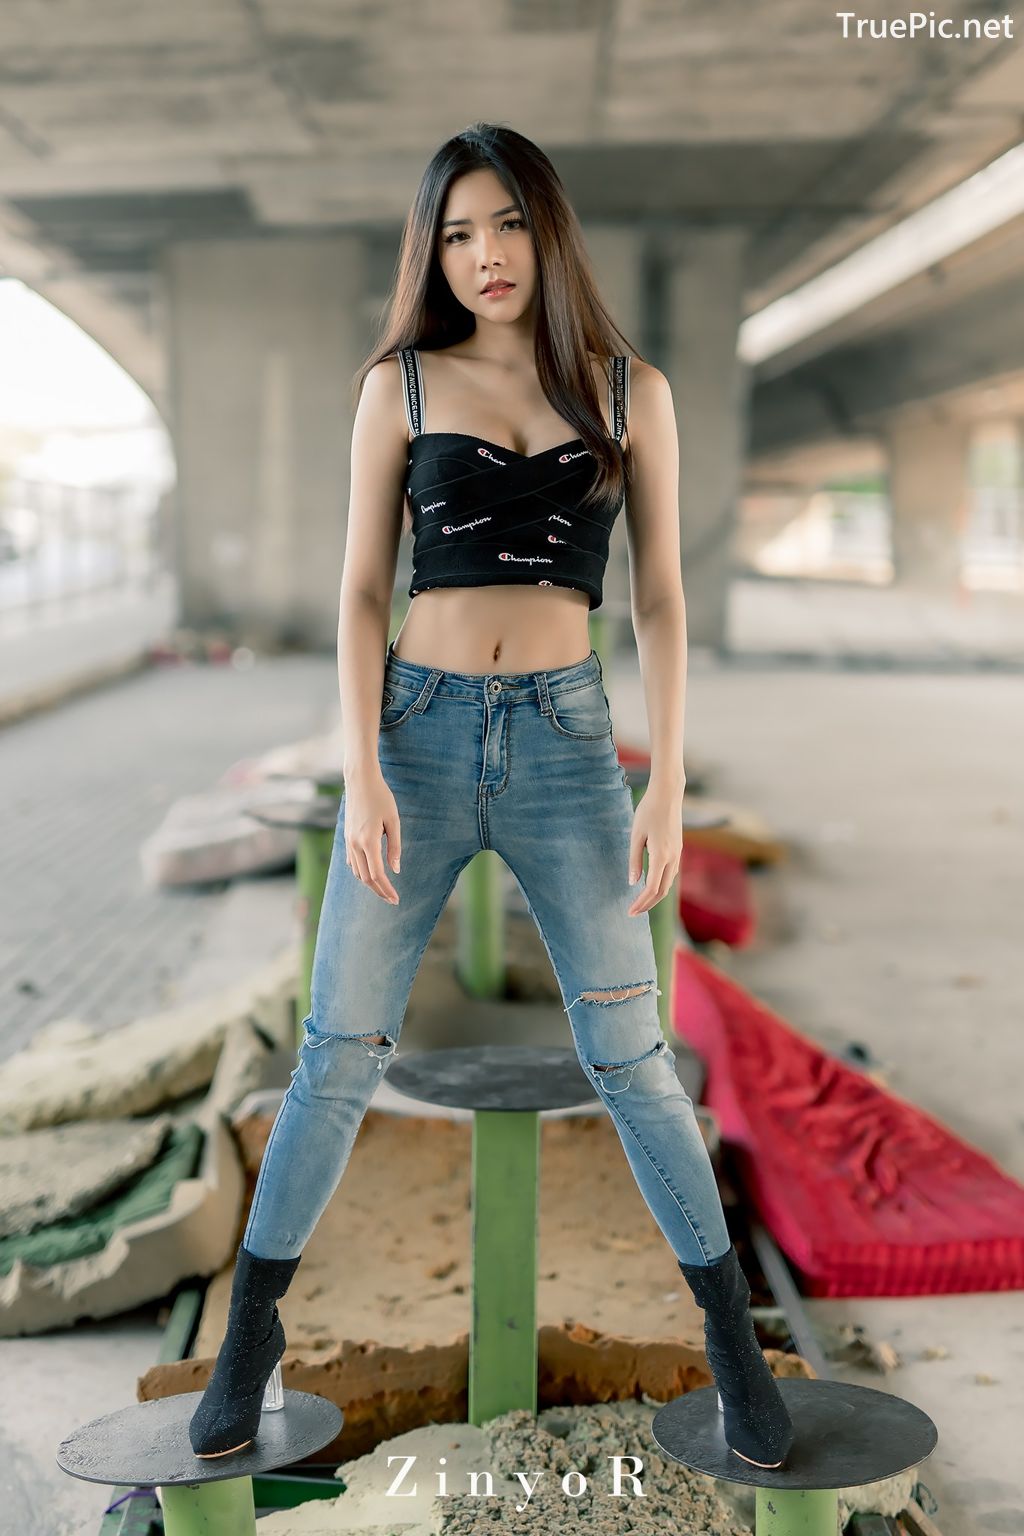 Image-Thailand-Model-Phitchamol-Srijantanet-Black-Crop-Top-and-Jean-TruePic.net- Picture-14